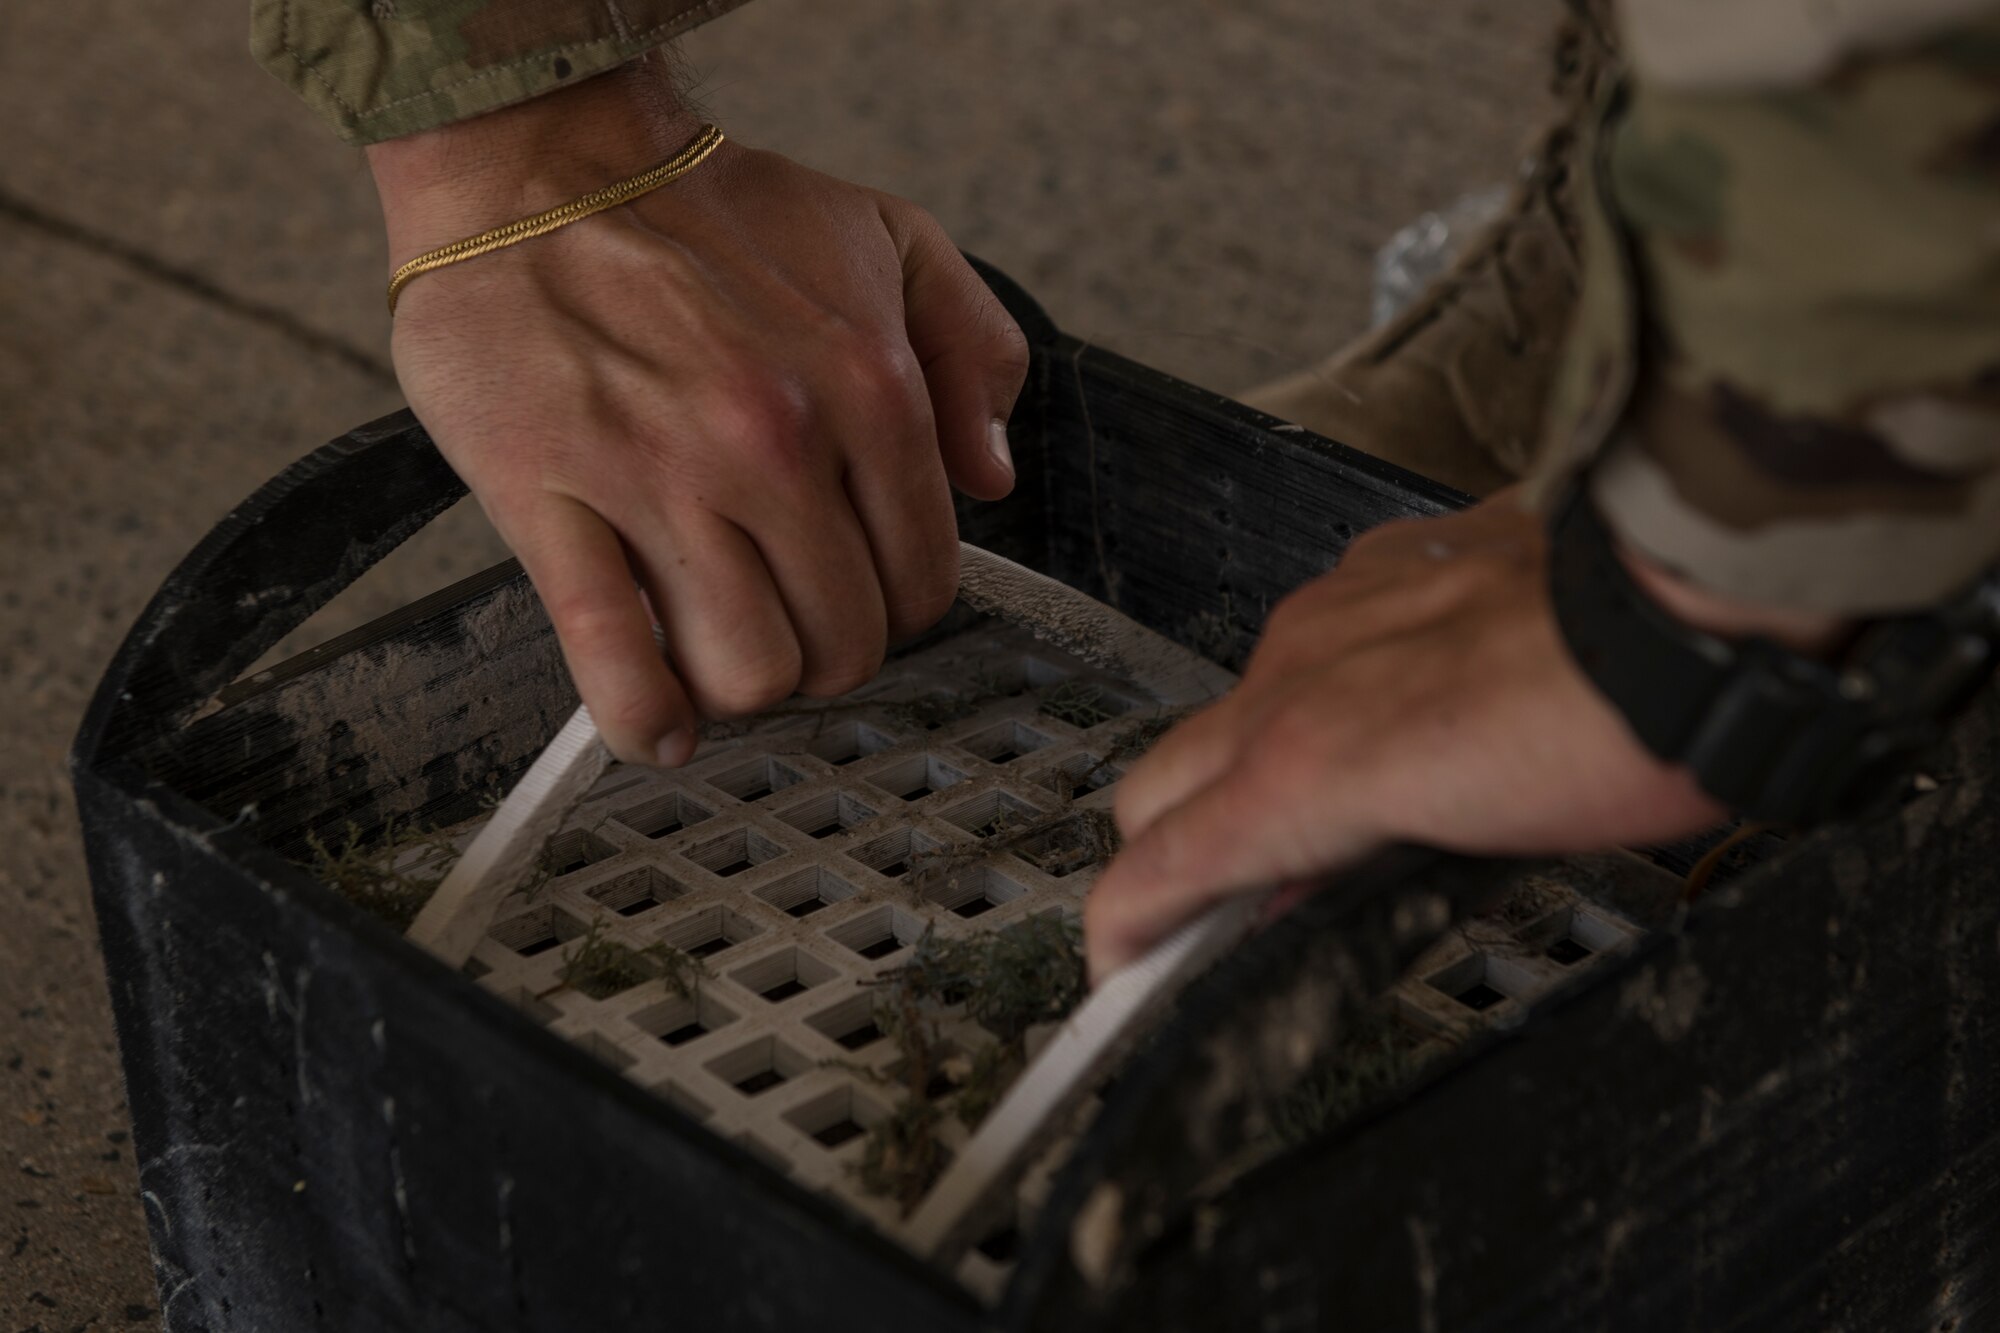 U.S. Air Force Senior Airman Ryan Disher, a vehicle operator assigned to the 379th Expeditionary Logistics Readiness Squadron, inspects a prototype drainage pan from a vehicle wash rack at Al Udeid Air Base, Qatar, June 13, 2020.